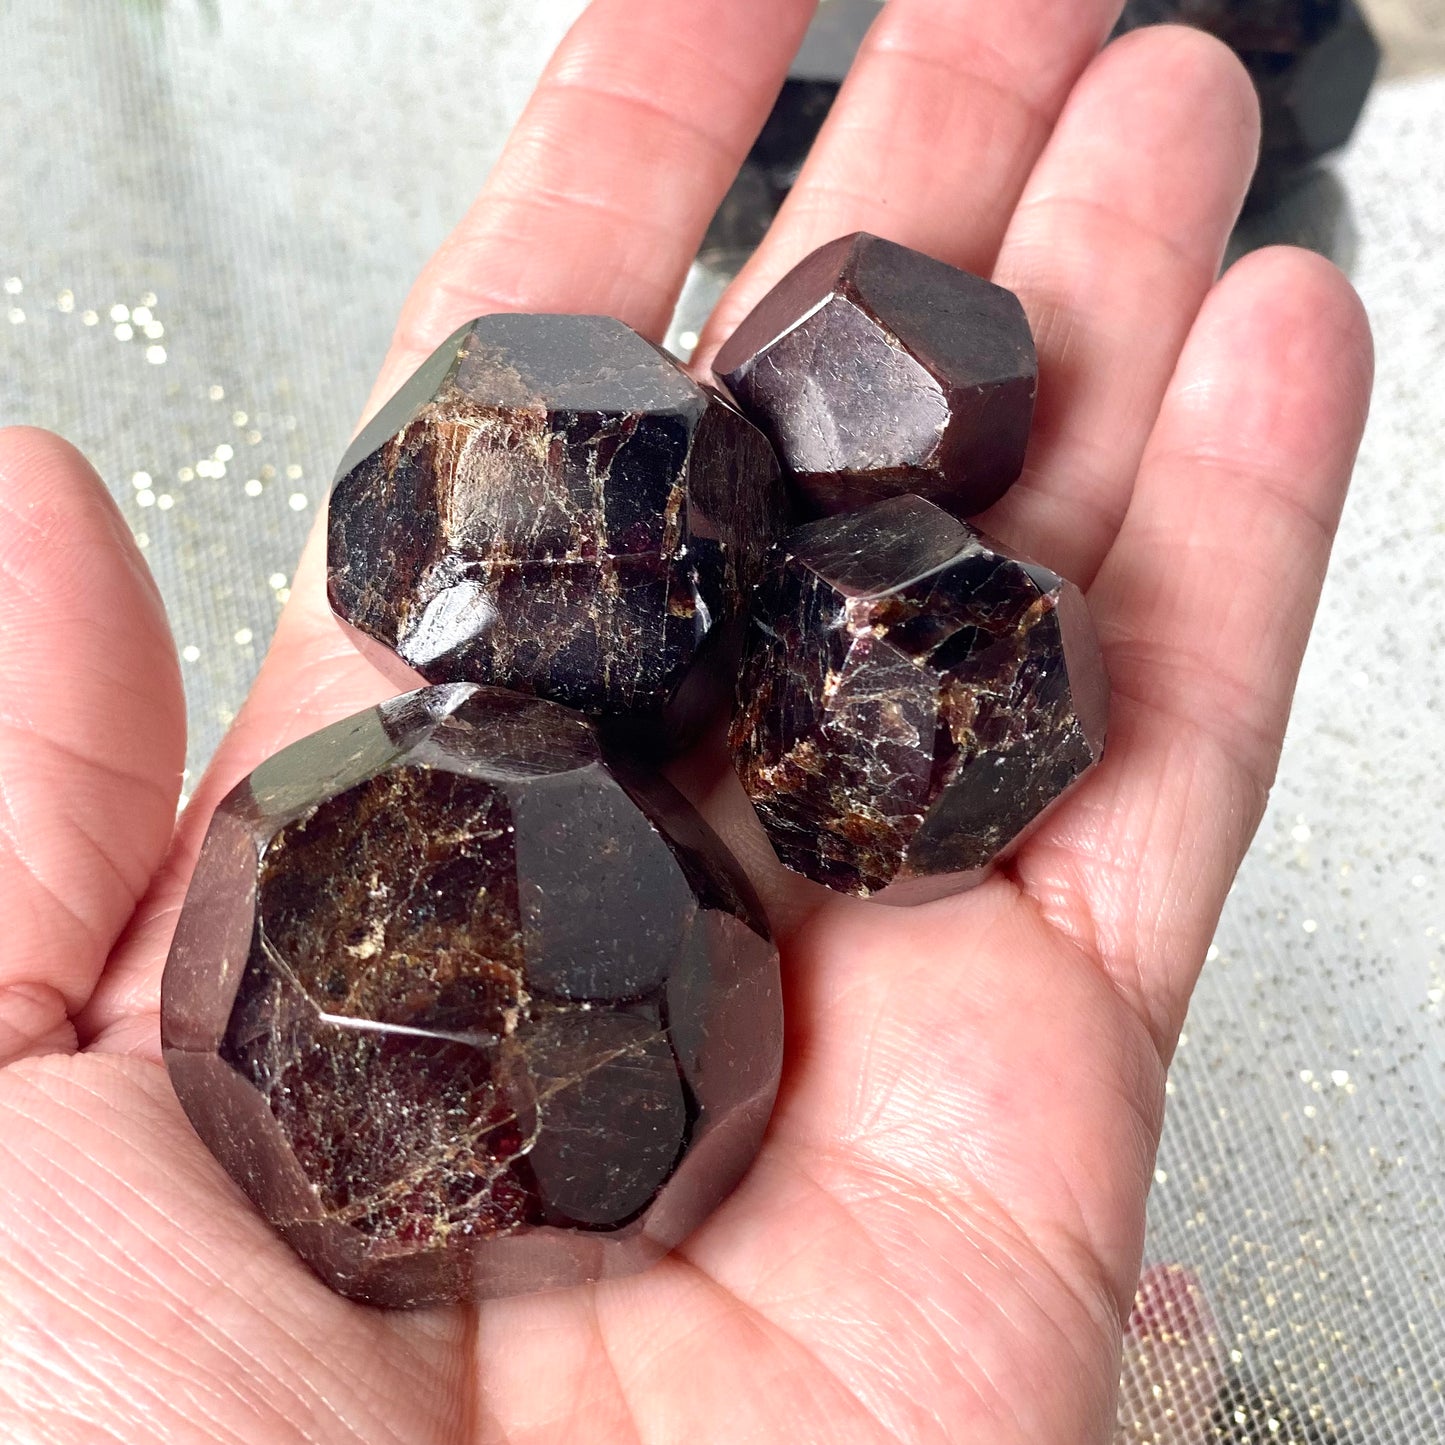 Garnet faceted stones for grounding and health-CBTS